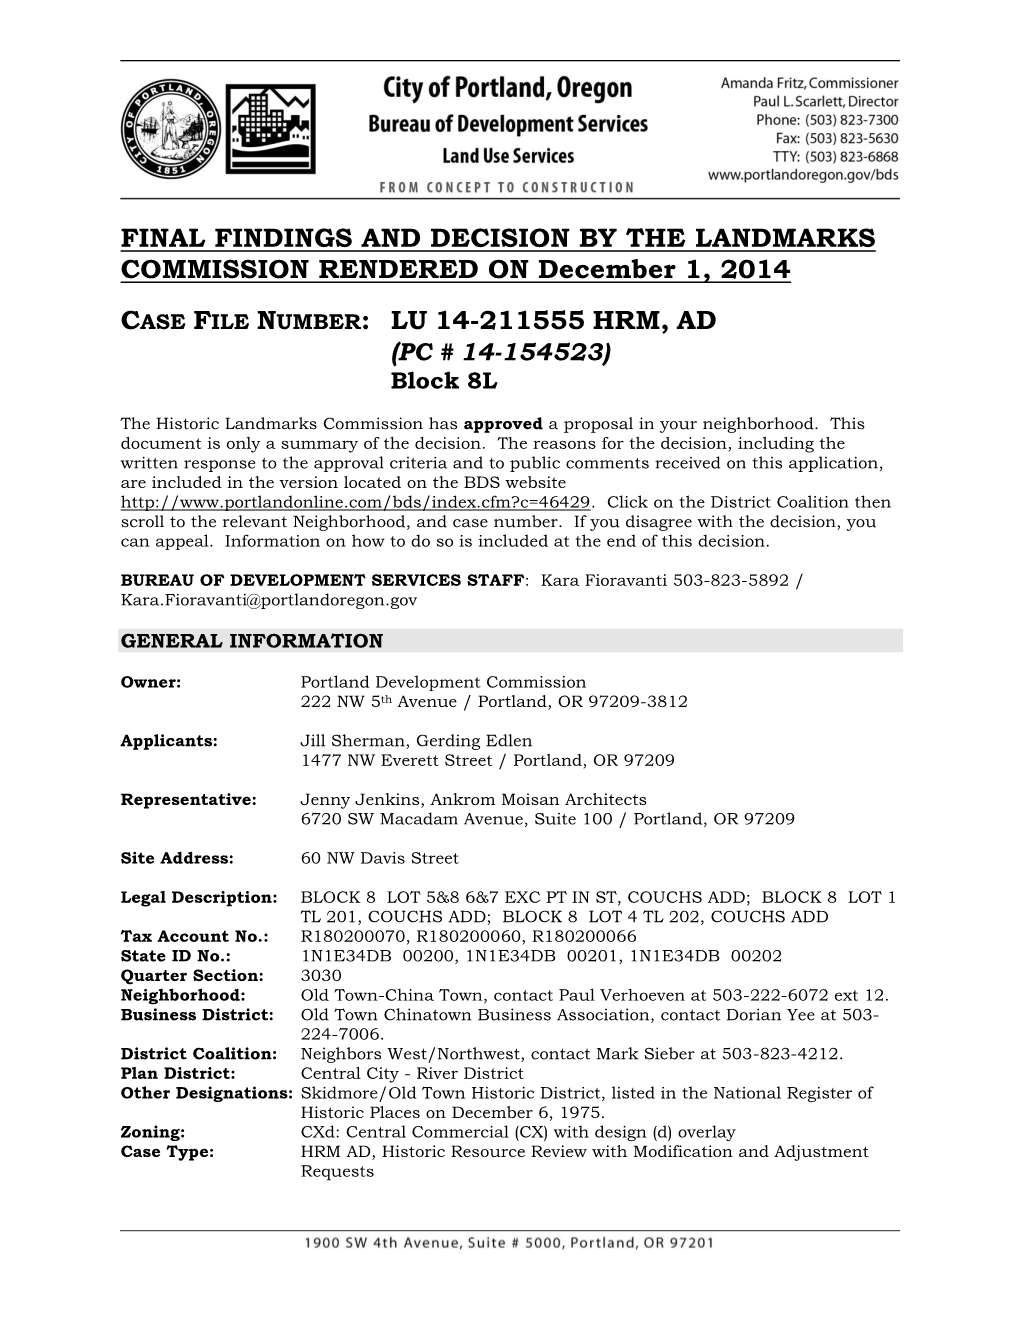 FINAL FINDINGS and DECISION by the LANDMARKS COMMISSION RENDERED on December 1, 2014